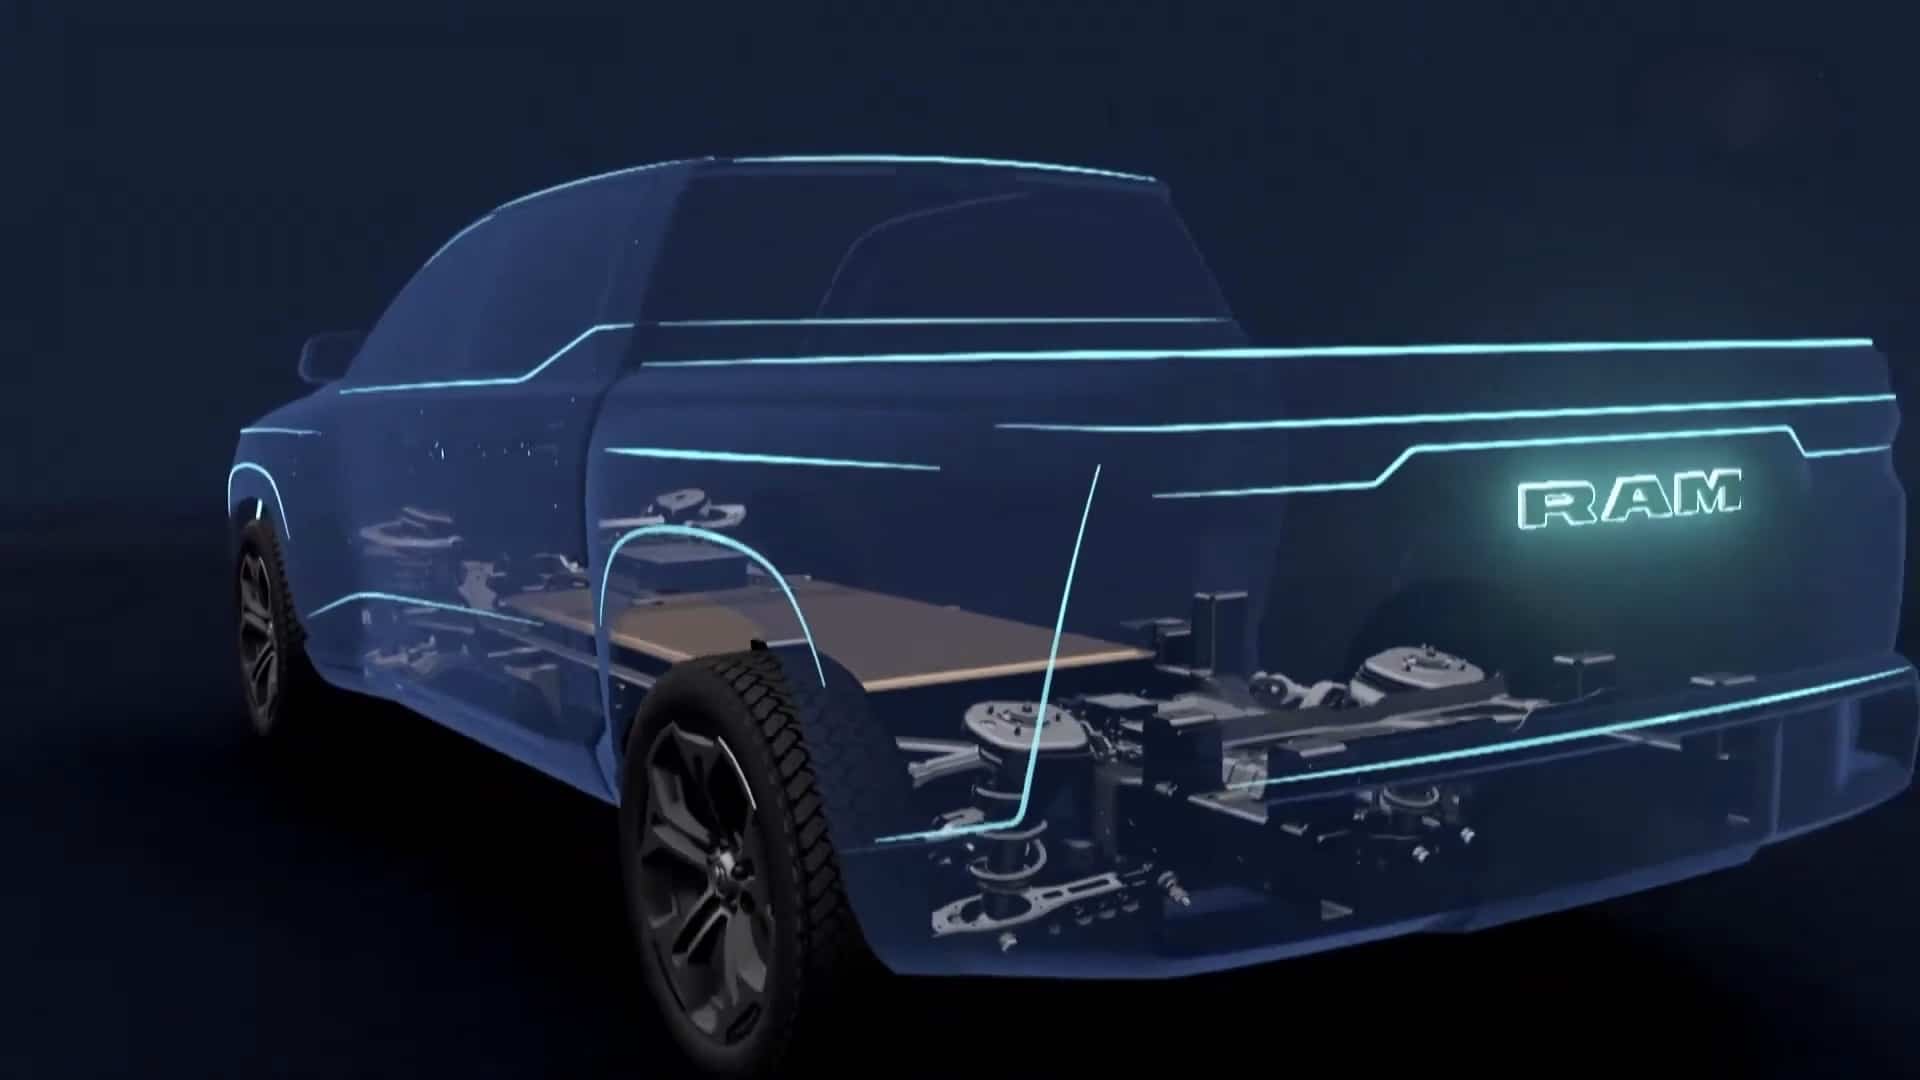 All-electric ram compact pickup truck